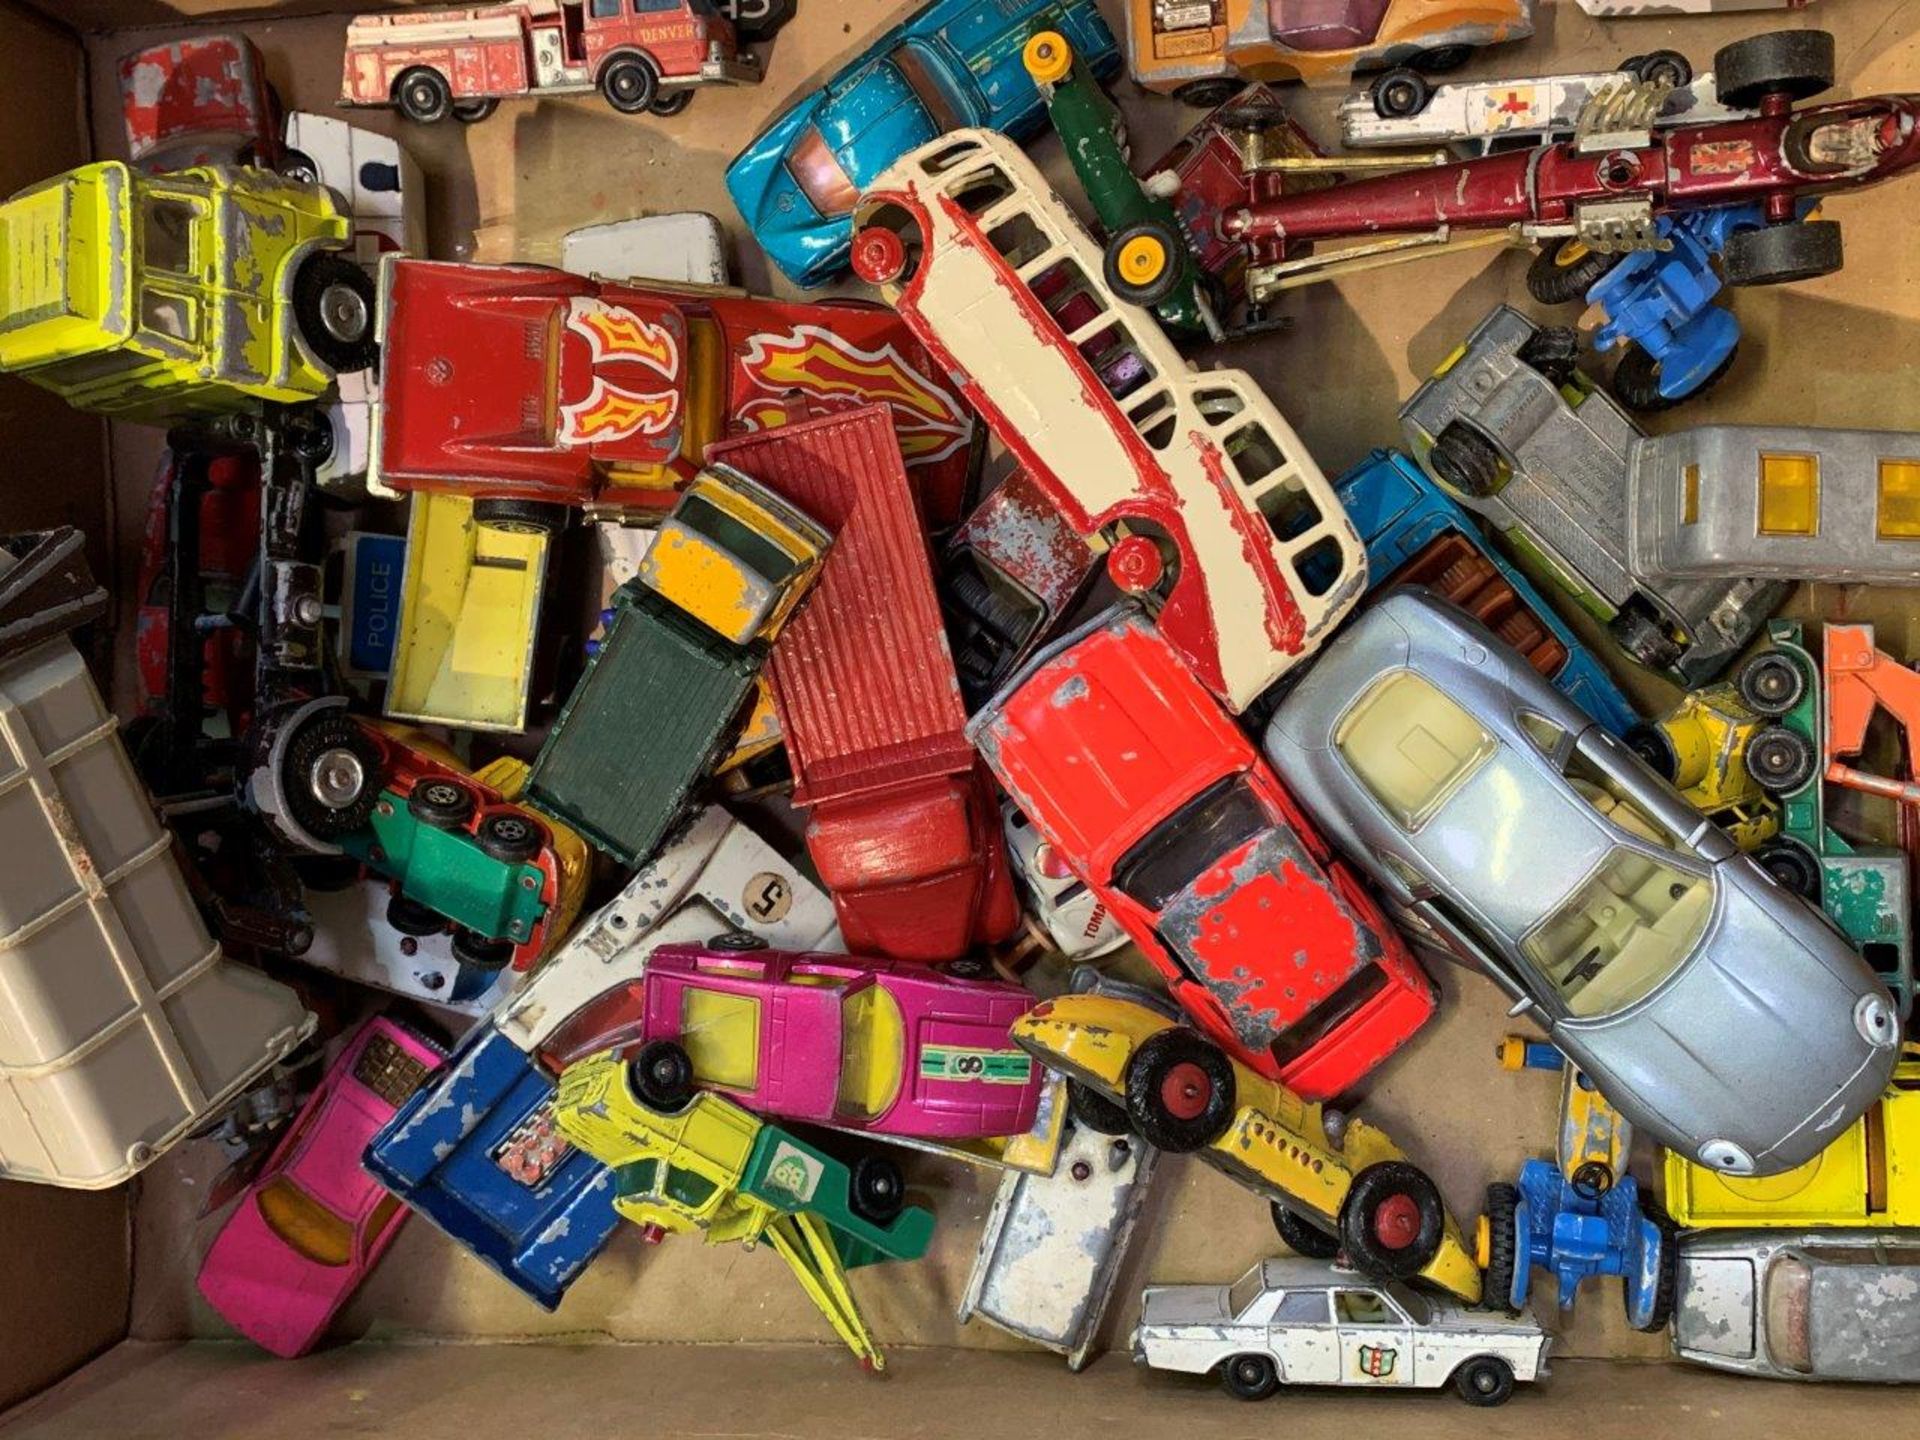 Large quantity of well used die-cast toy vehicles - Image 2 of 2